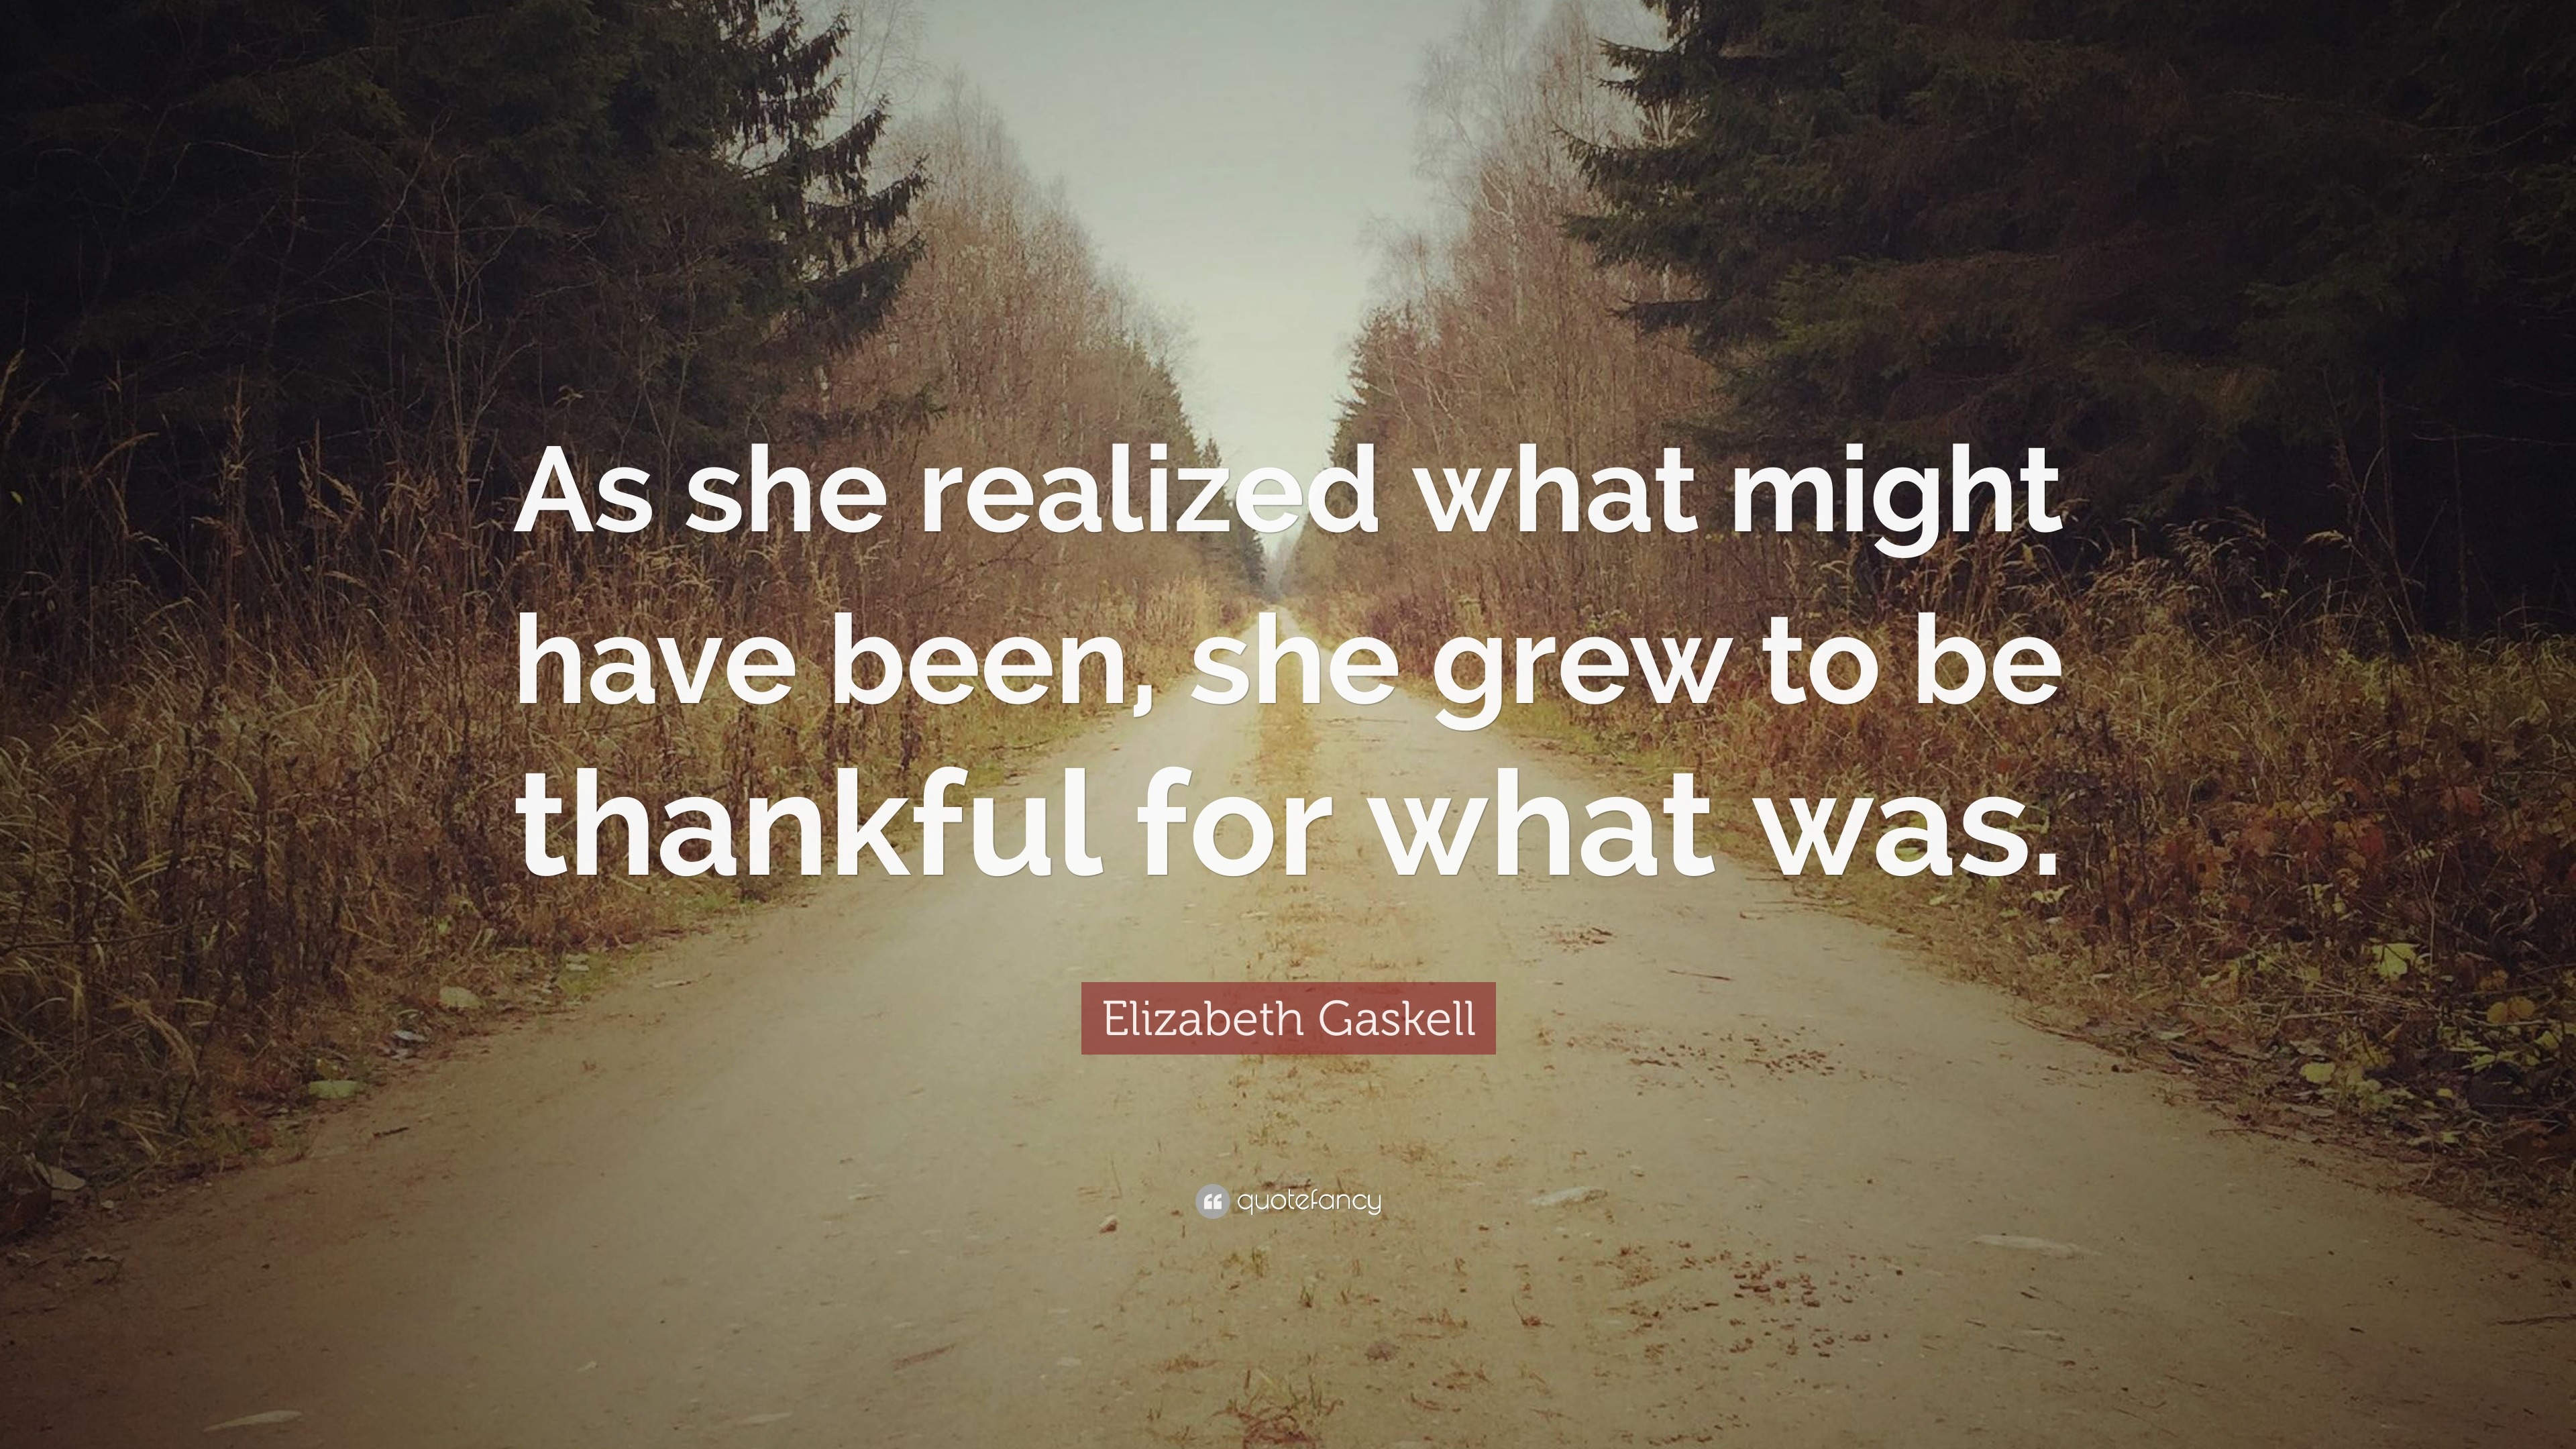 Elizabeth Gaskell Quote As She Realized What Might Have Been She Grew To Be Thankful For